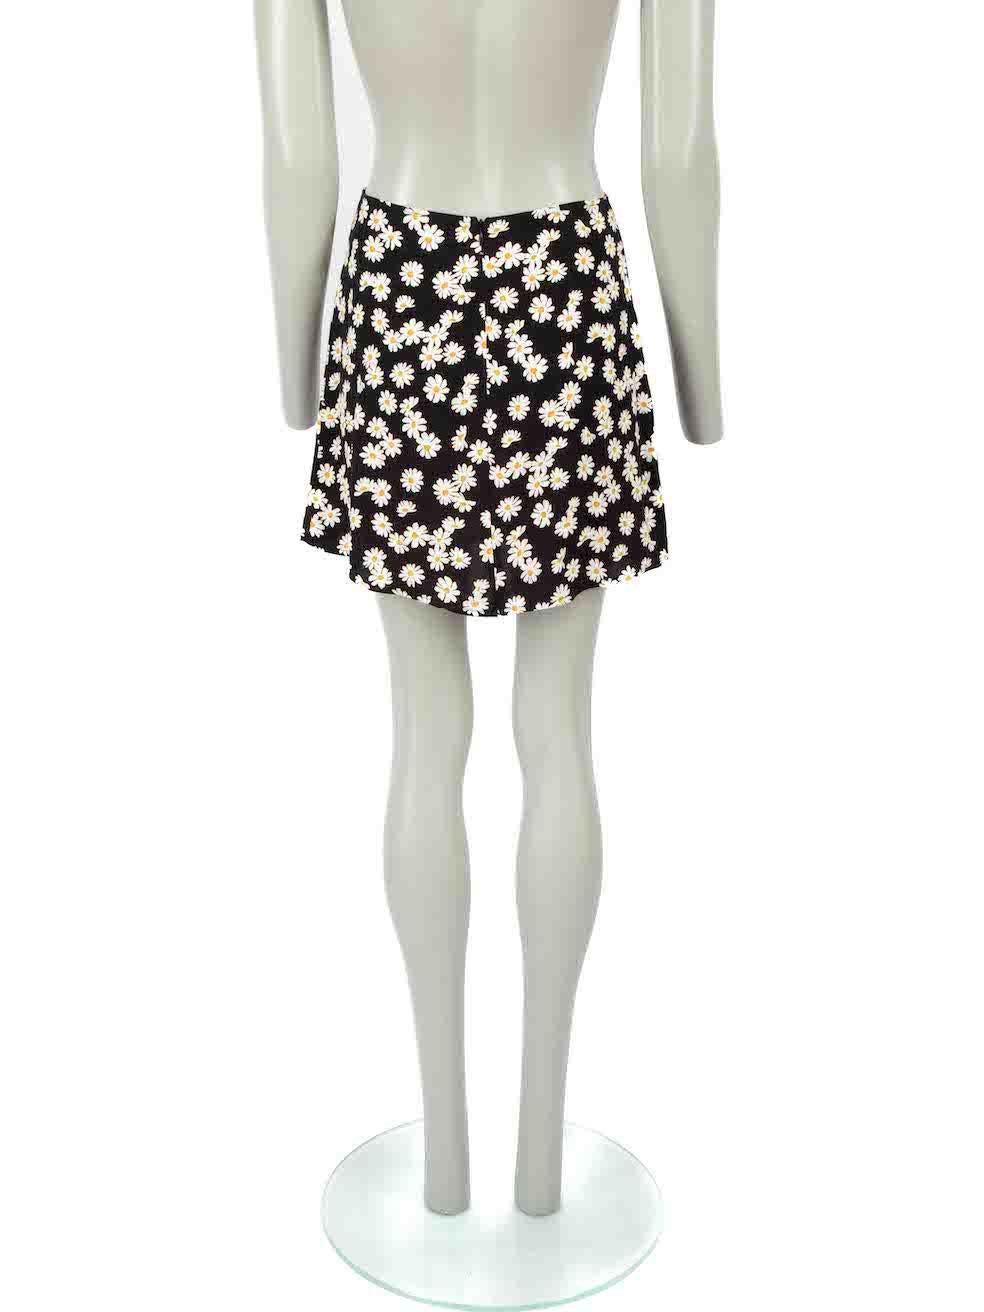 Reformation Black Daisy Print Mini Skirt Size XS In Good Condition For Sale In London, GB